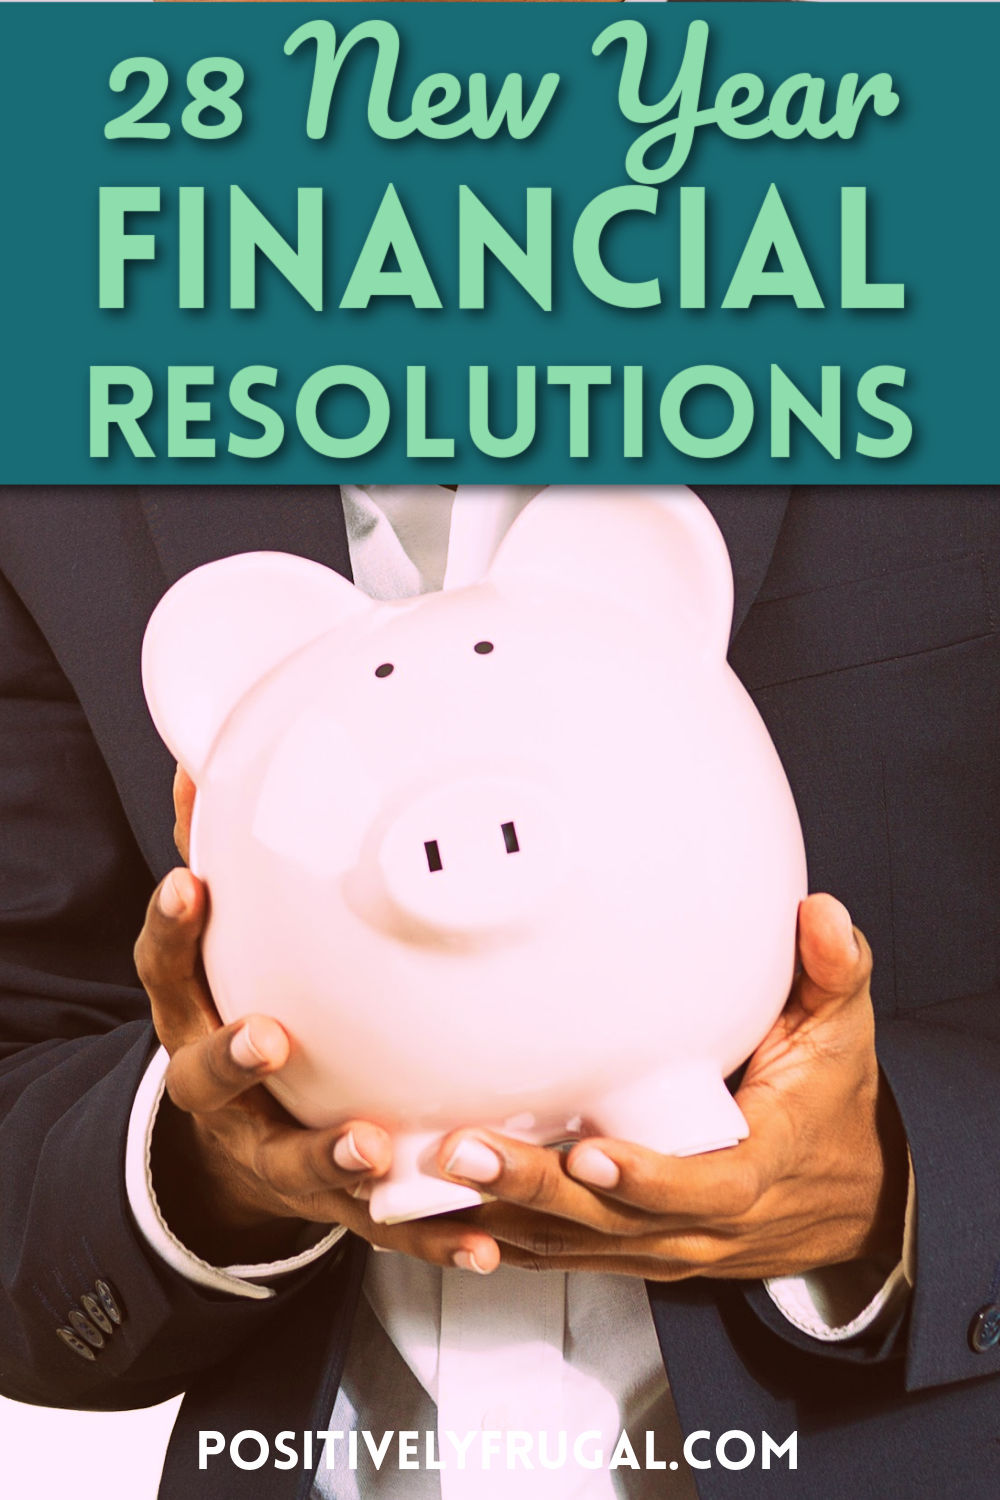 New Year's Financial Resolutions by PositivelyFrugal.com